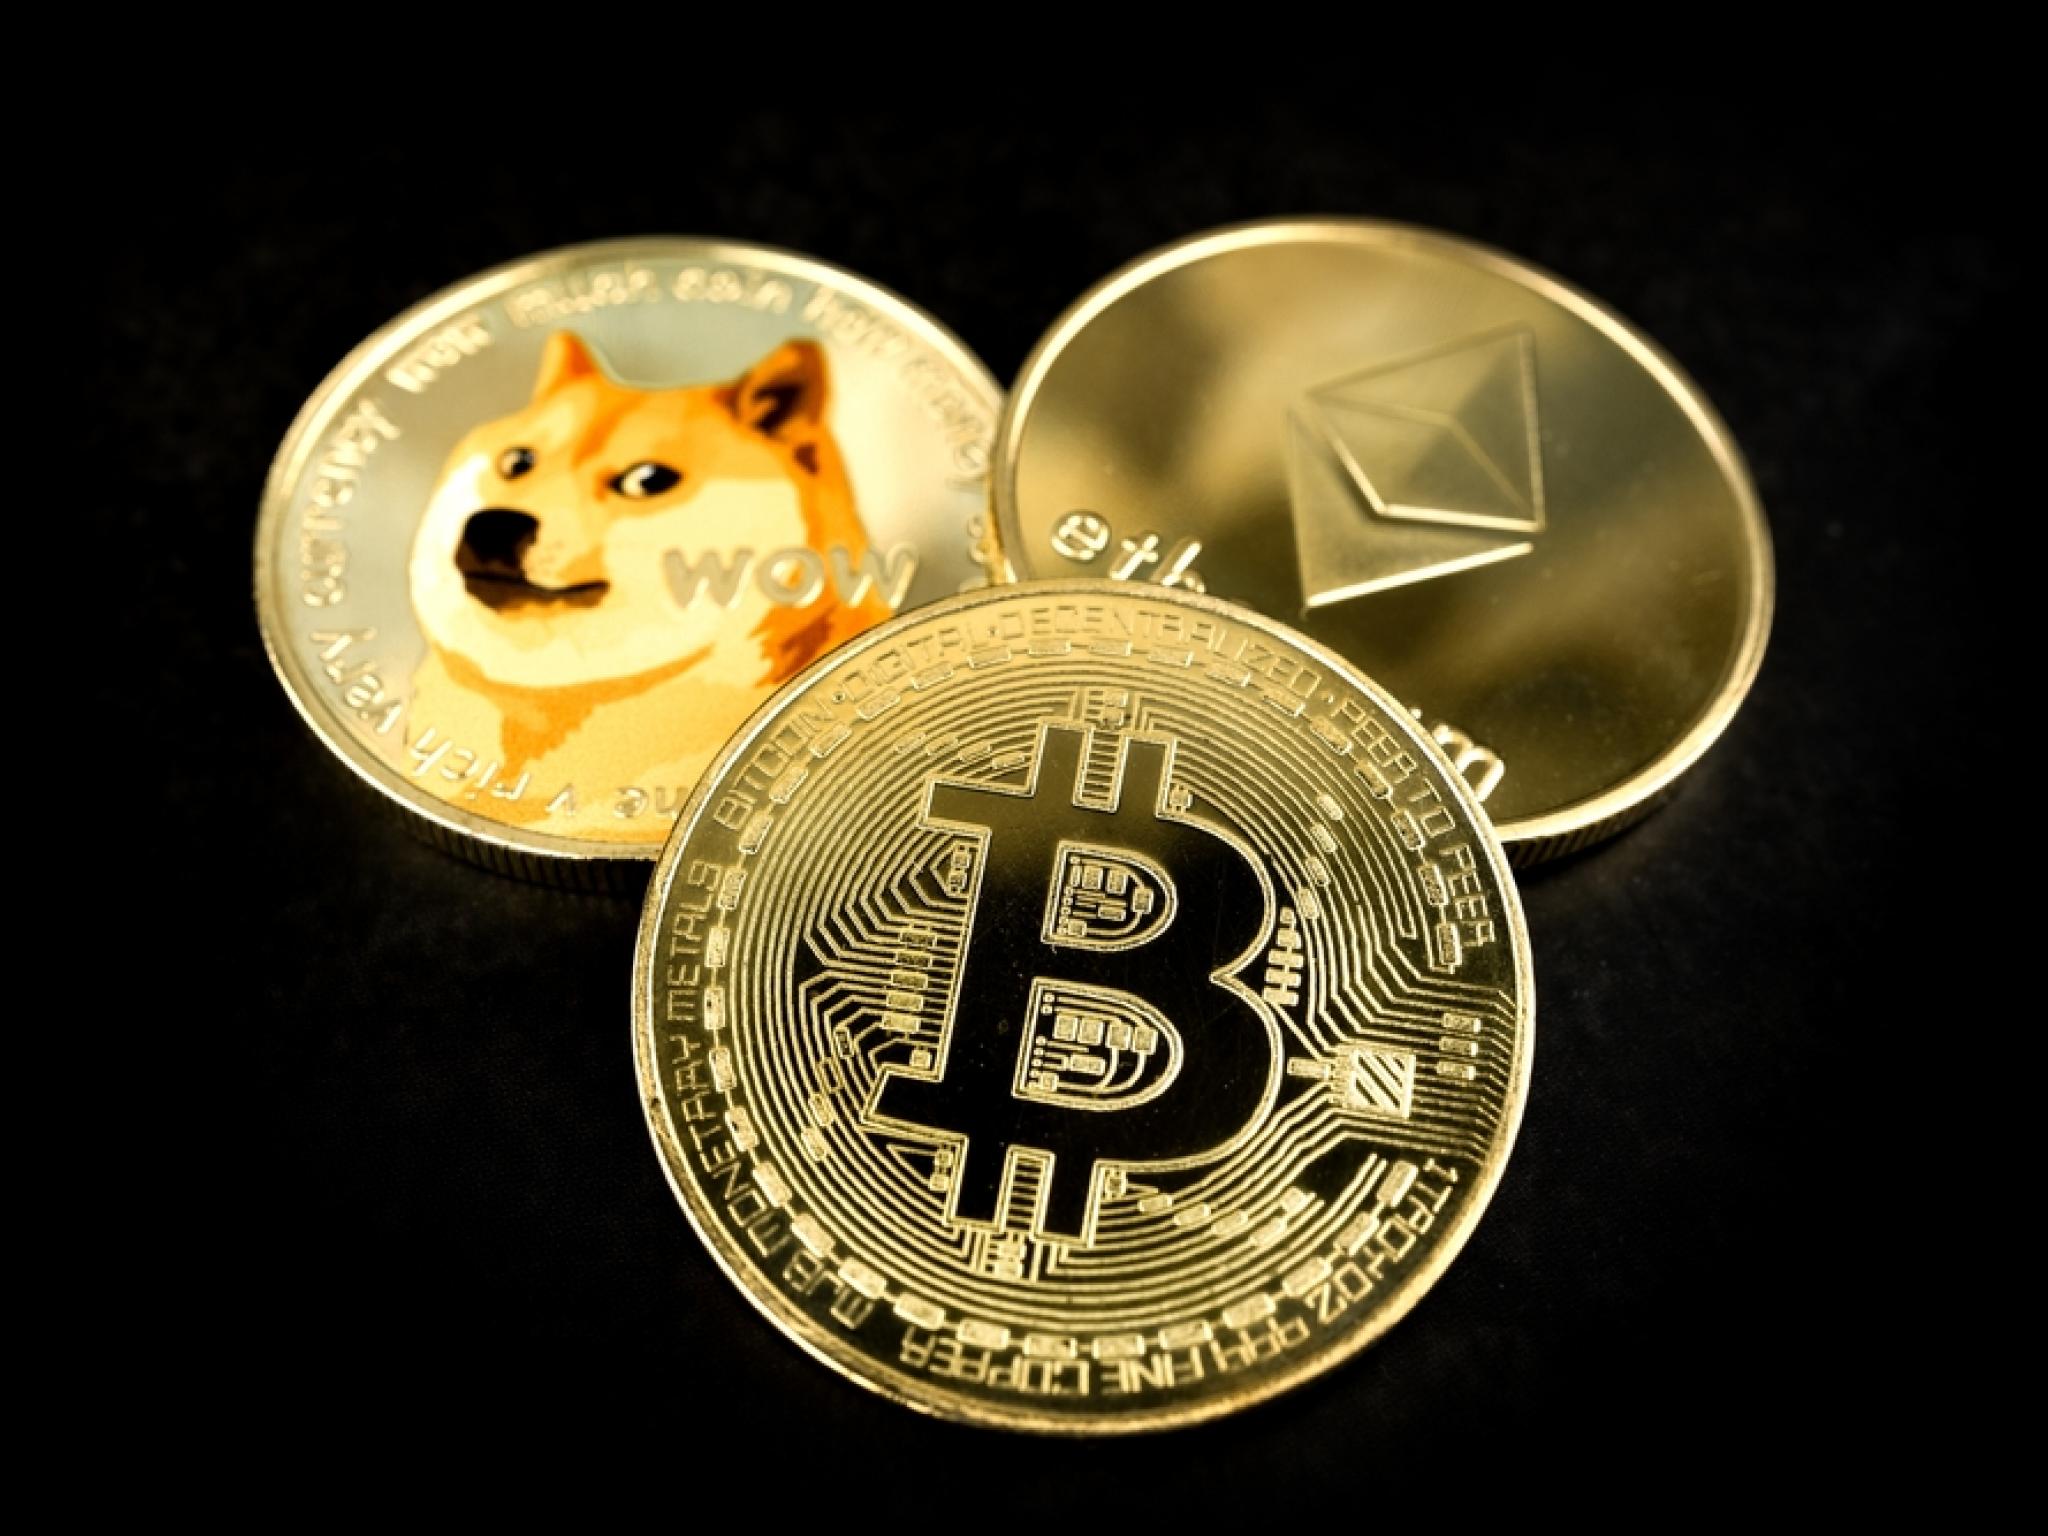  bitcoin-ethereum-dogecoin-trade-mixed-as-two-week-rally-slows-down-rivian-rebounds-from-record-low-in-premarket---top-headlines-today-while-us-was-sleeping 